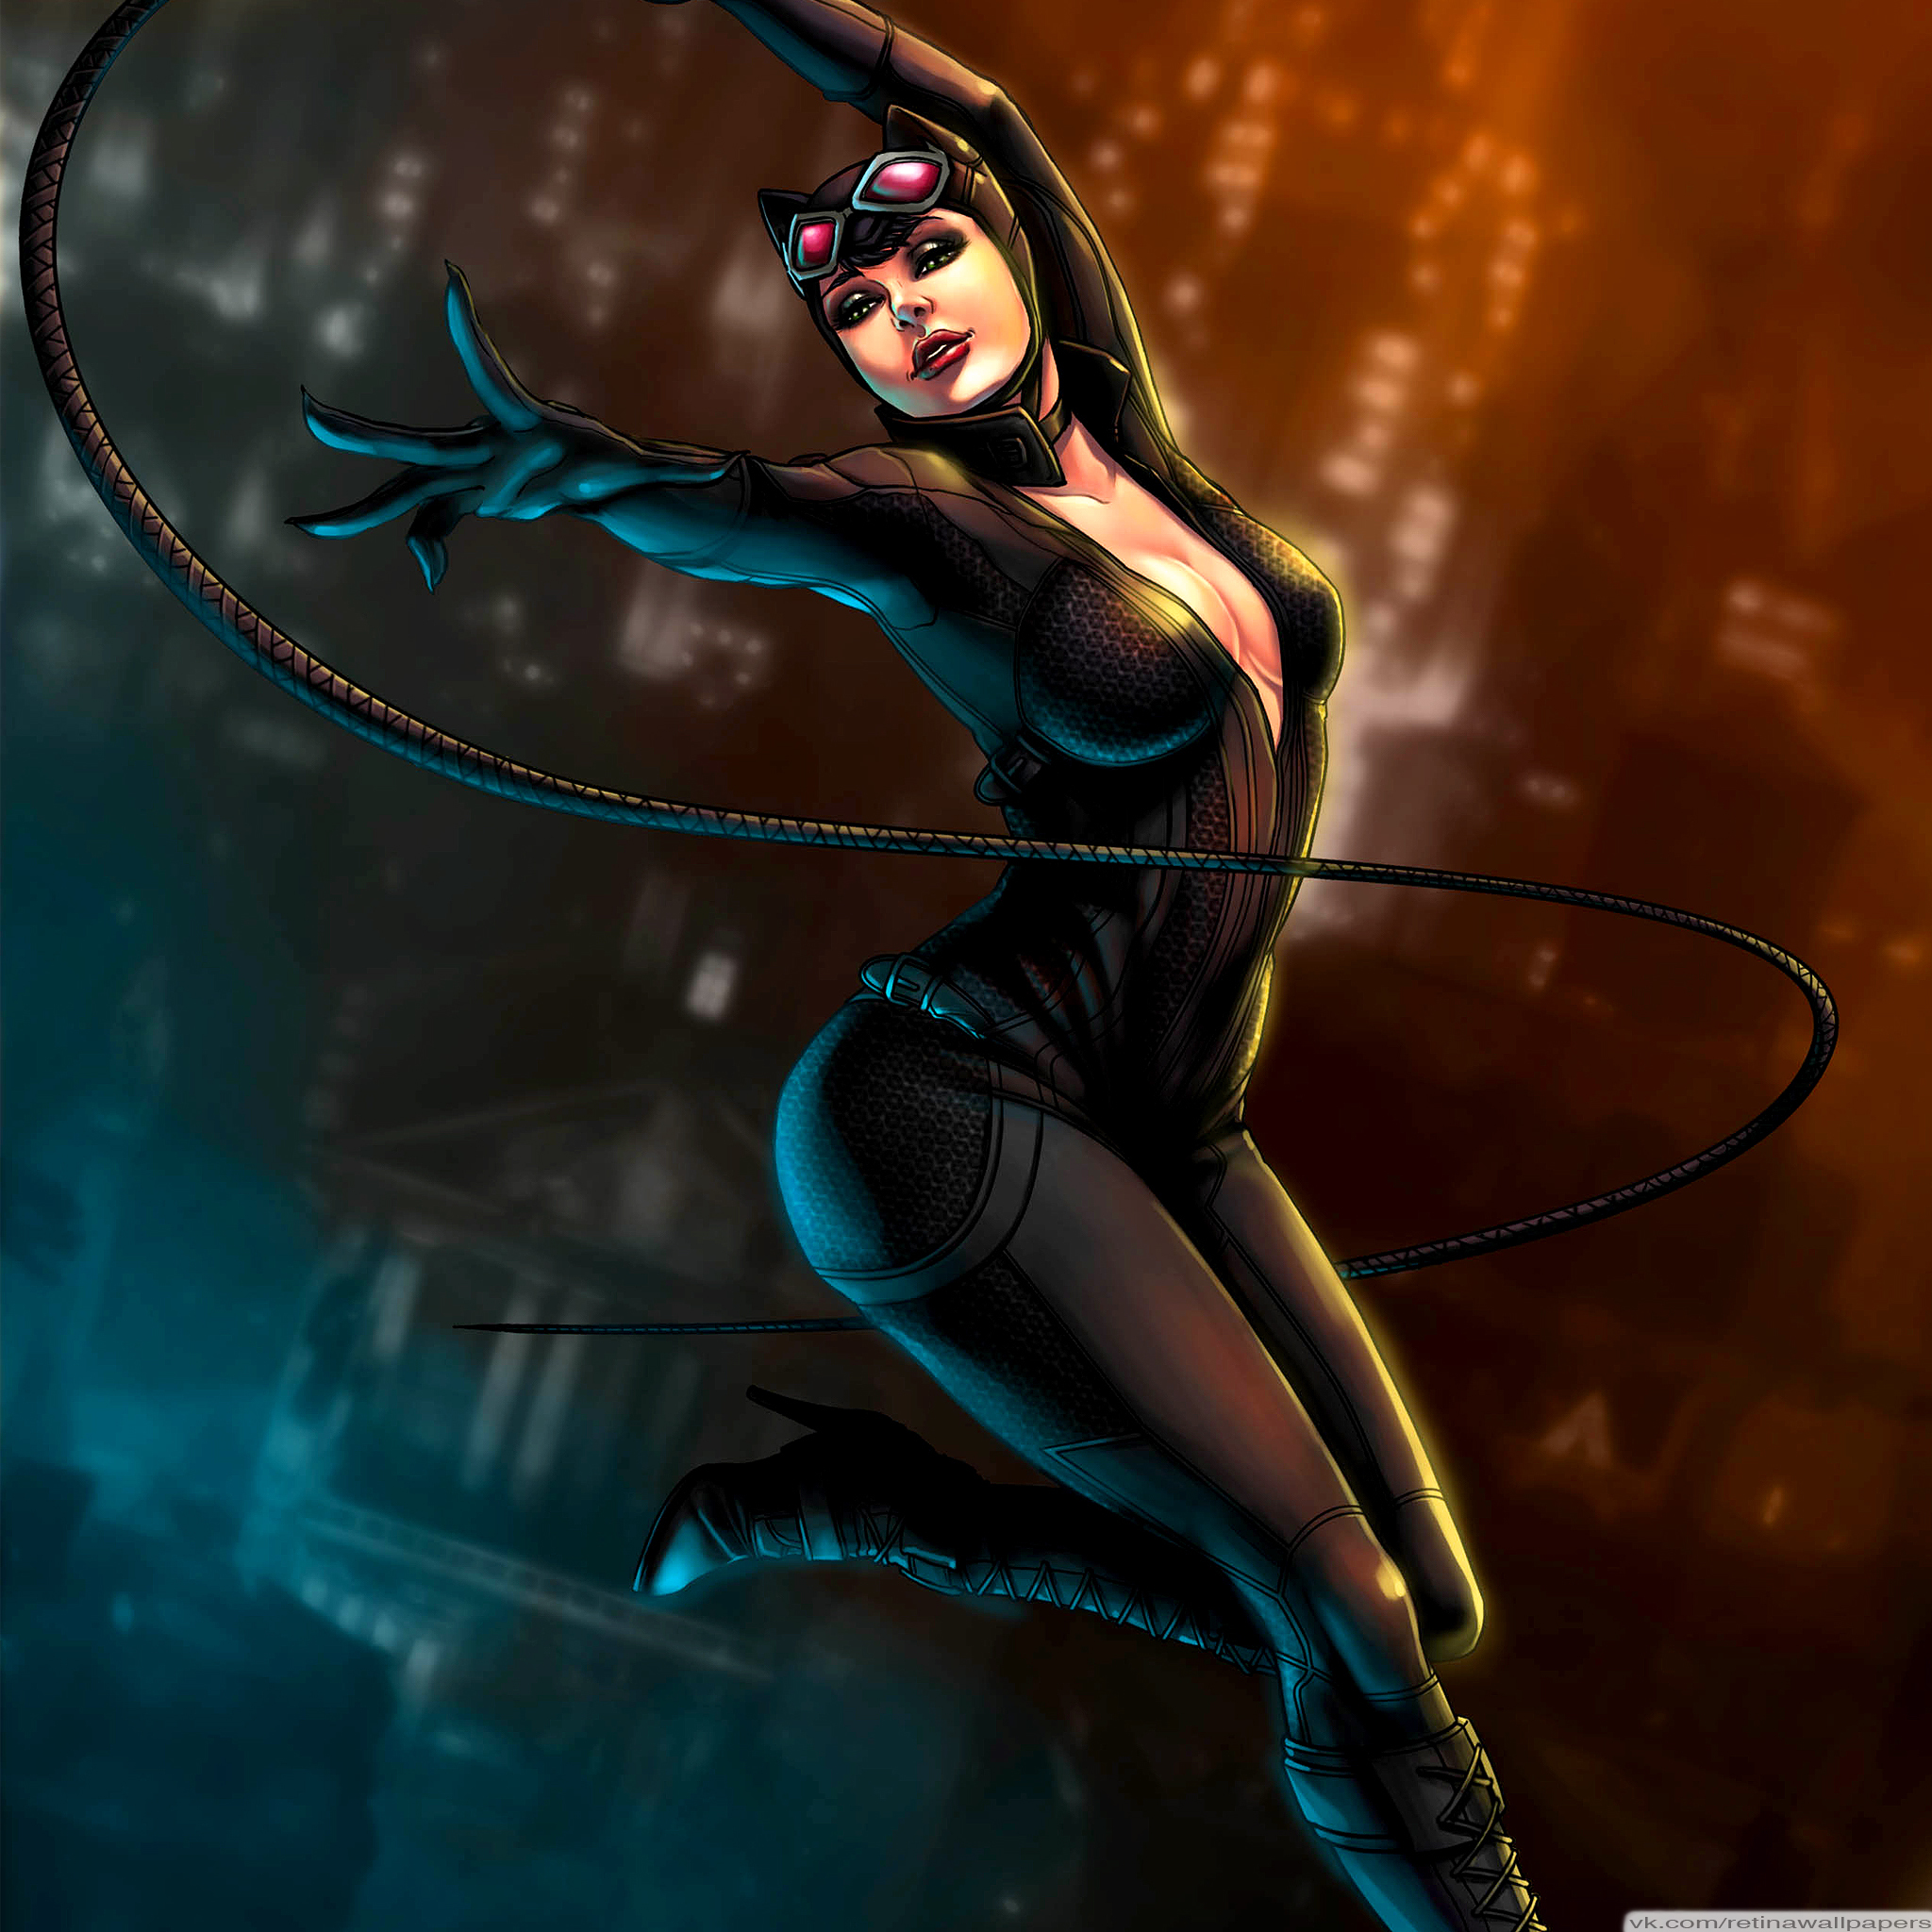 Popular Catwoman images for mobile phone